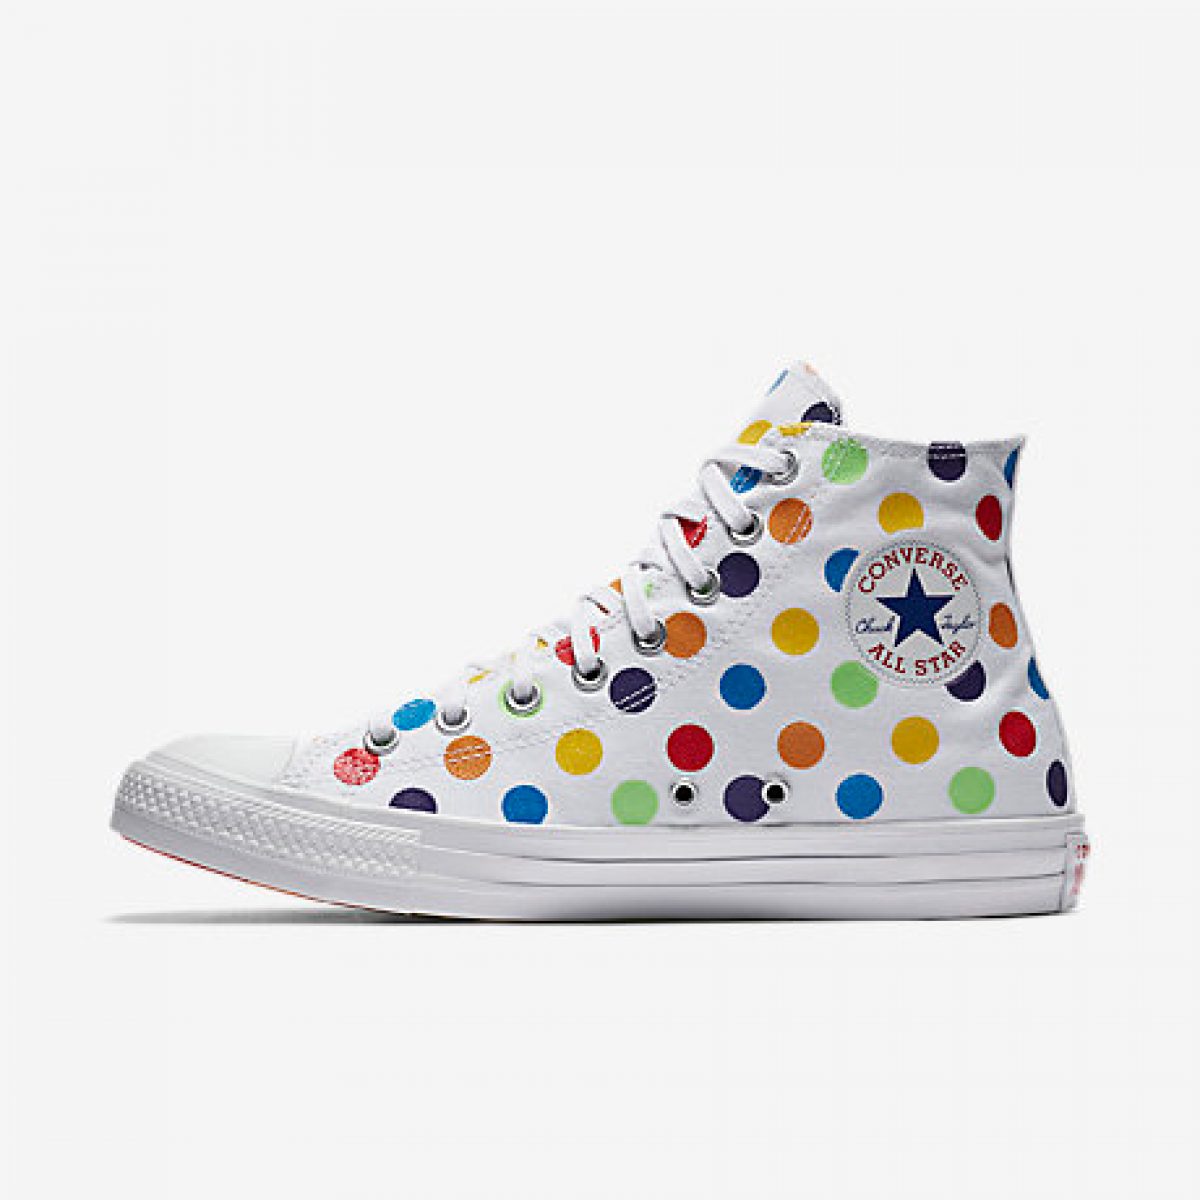 HUNTING® Taylor Cyrus High-Tops + All Pride - Chuck COOL Star Miley